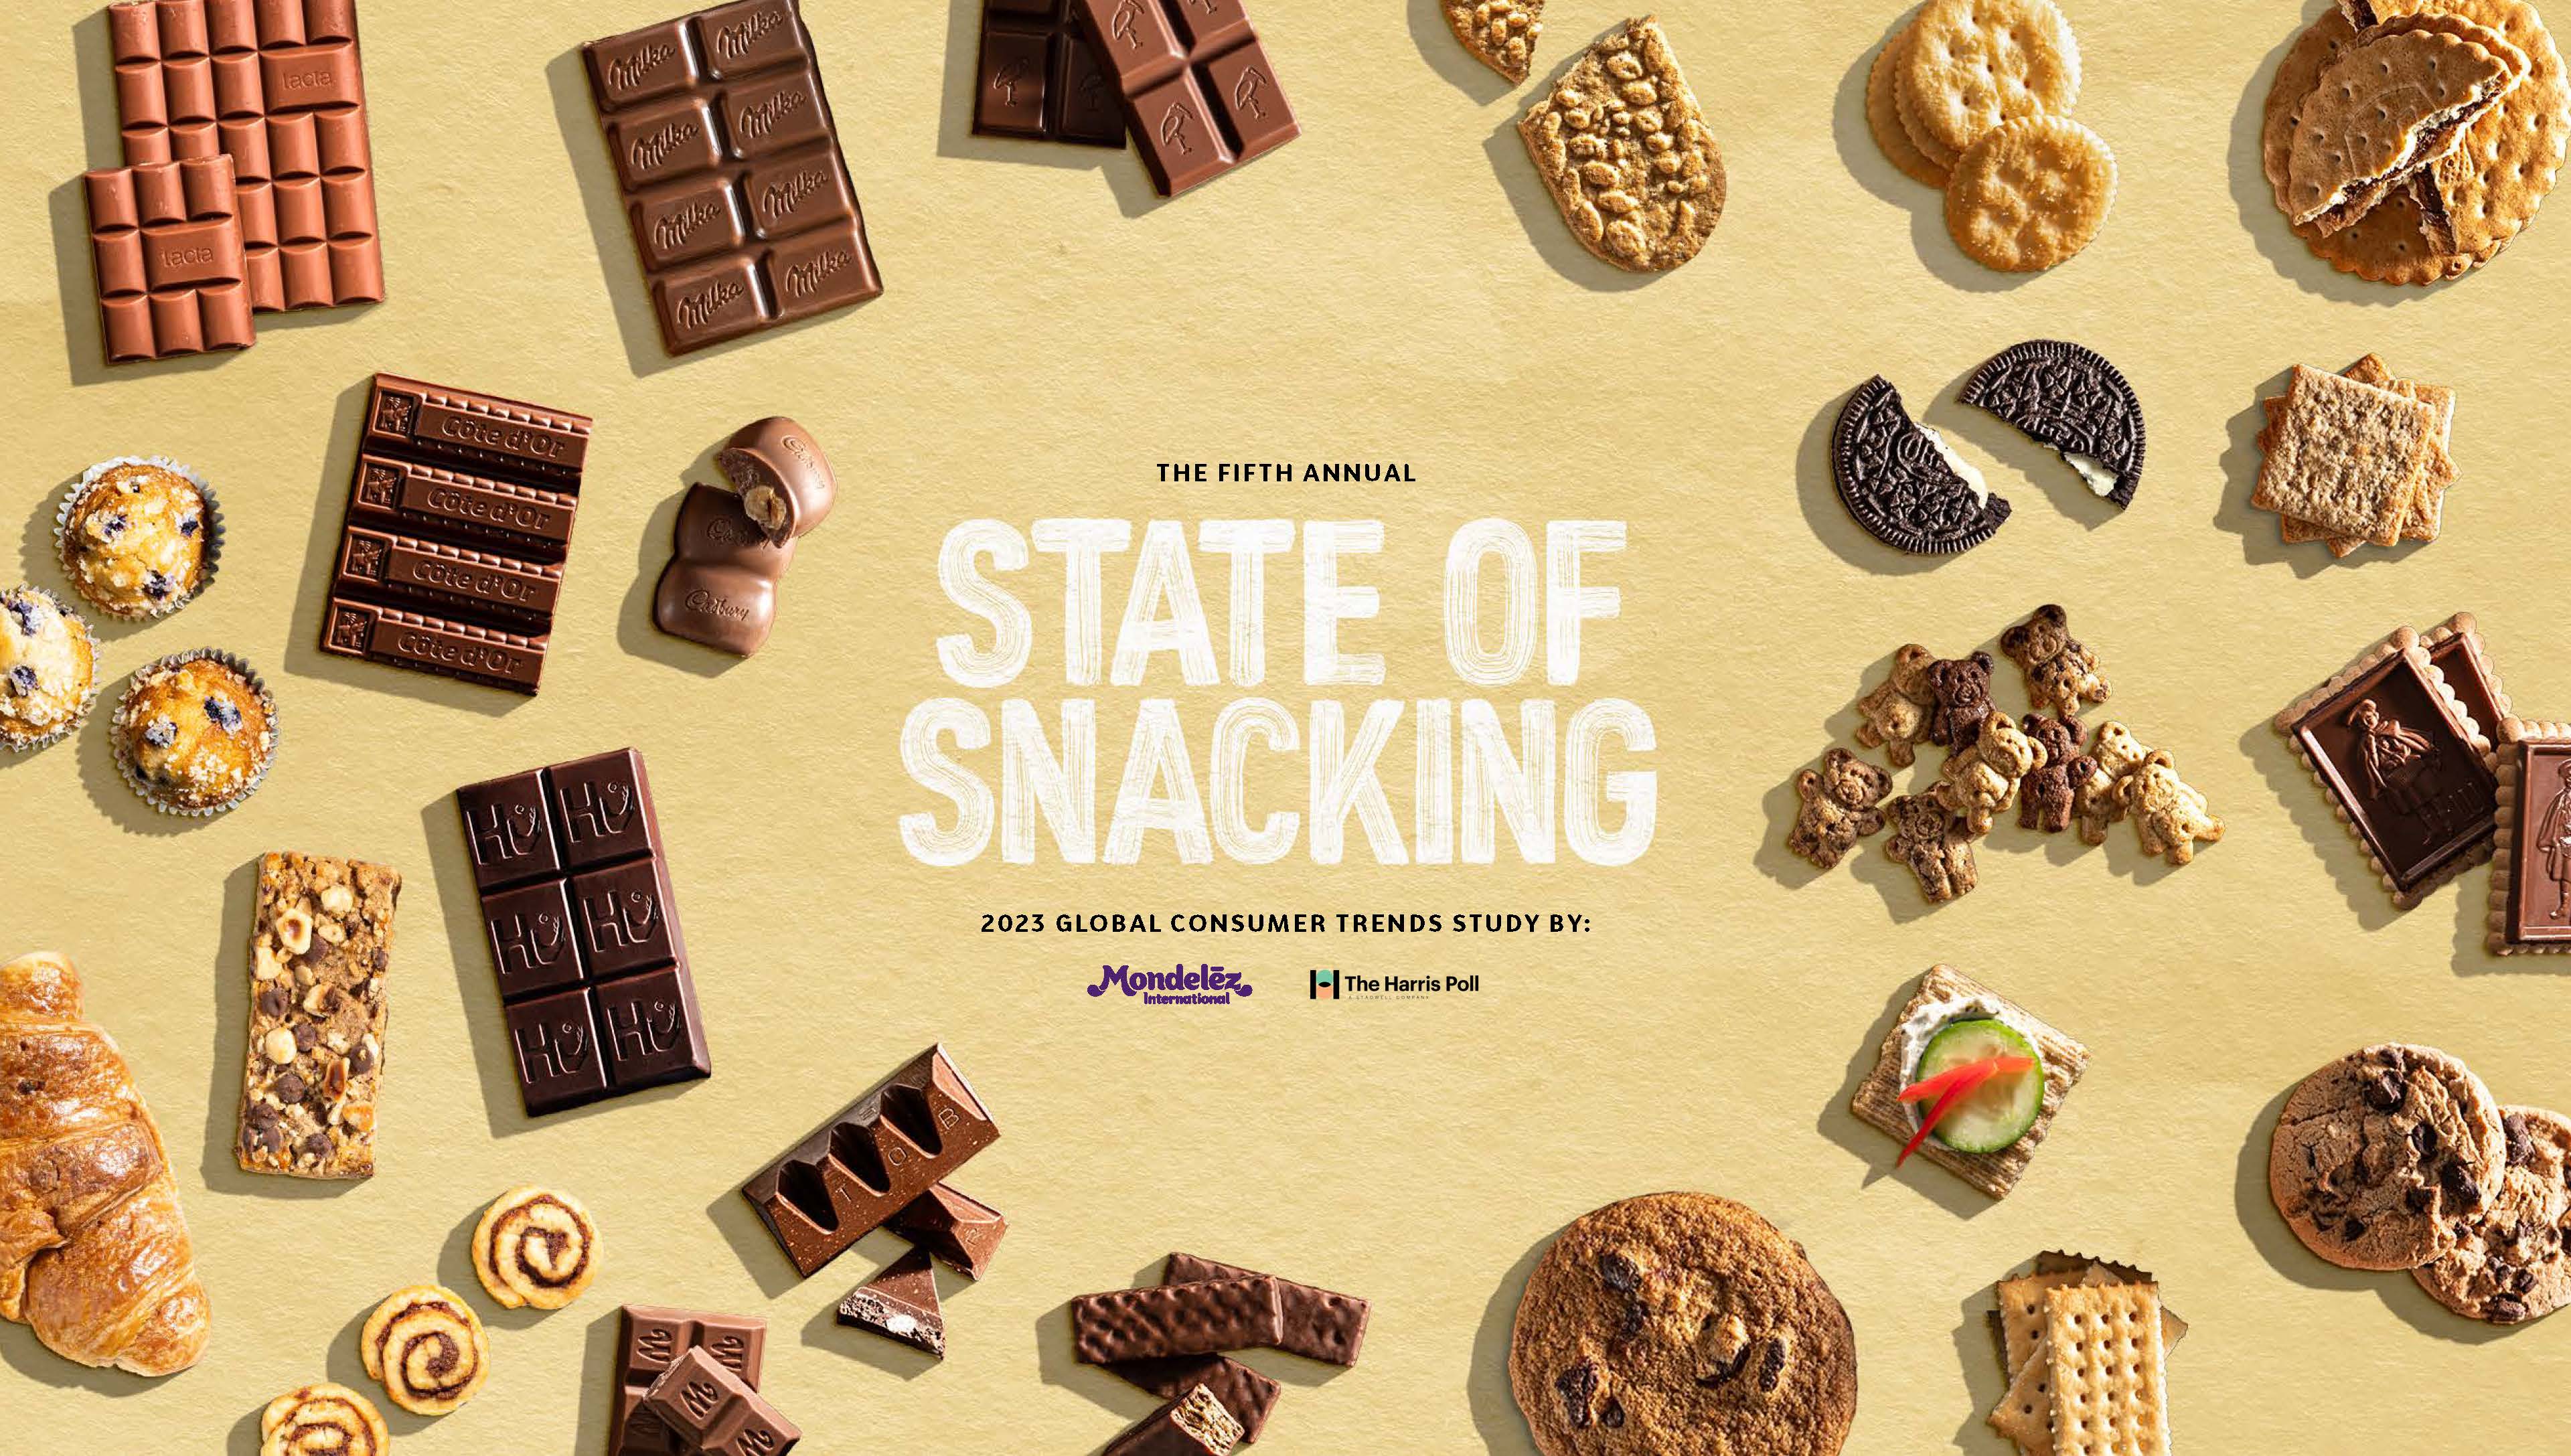 State of Snacking report cover featuring Mondelez products